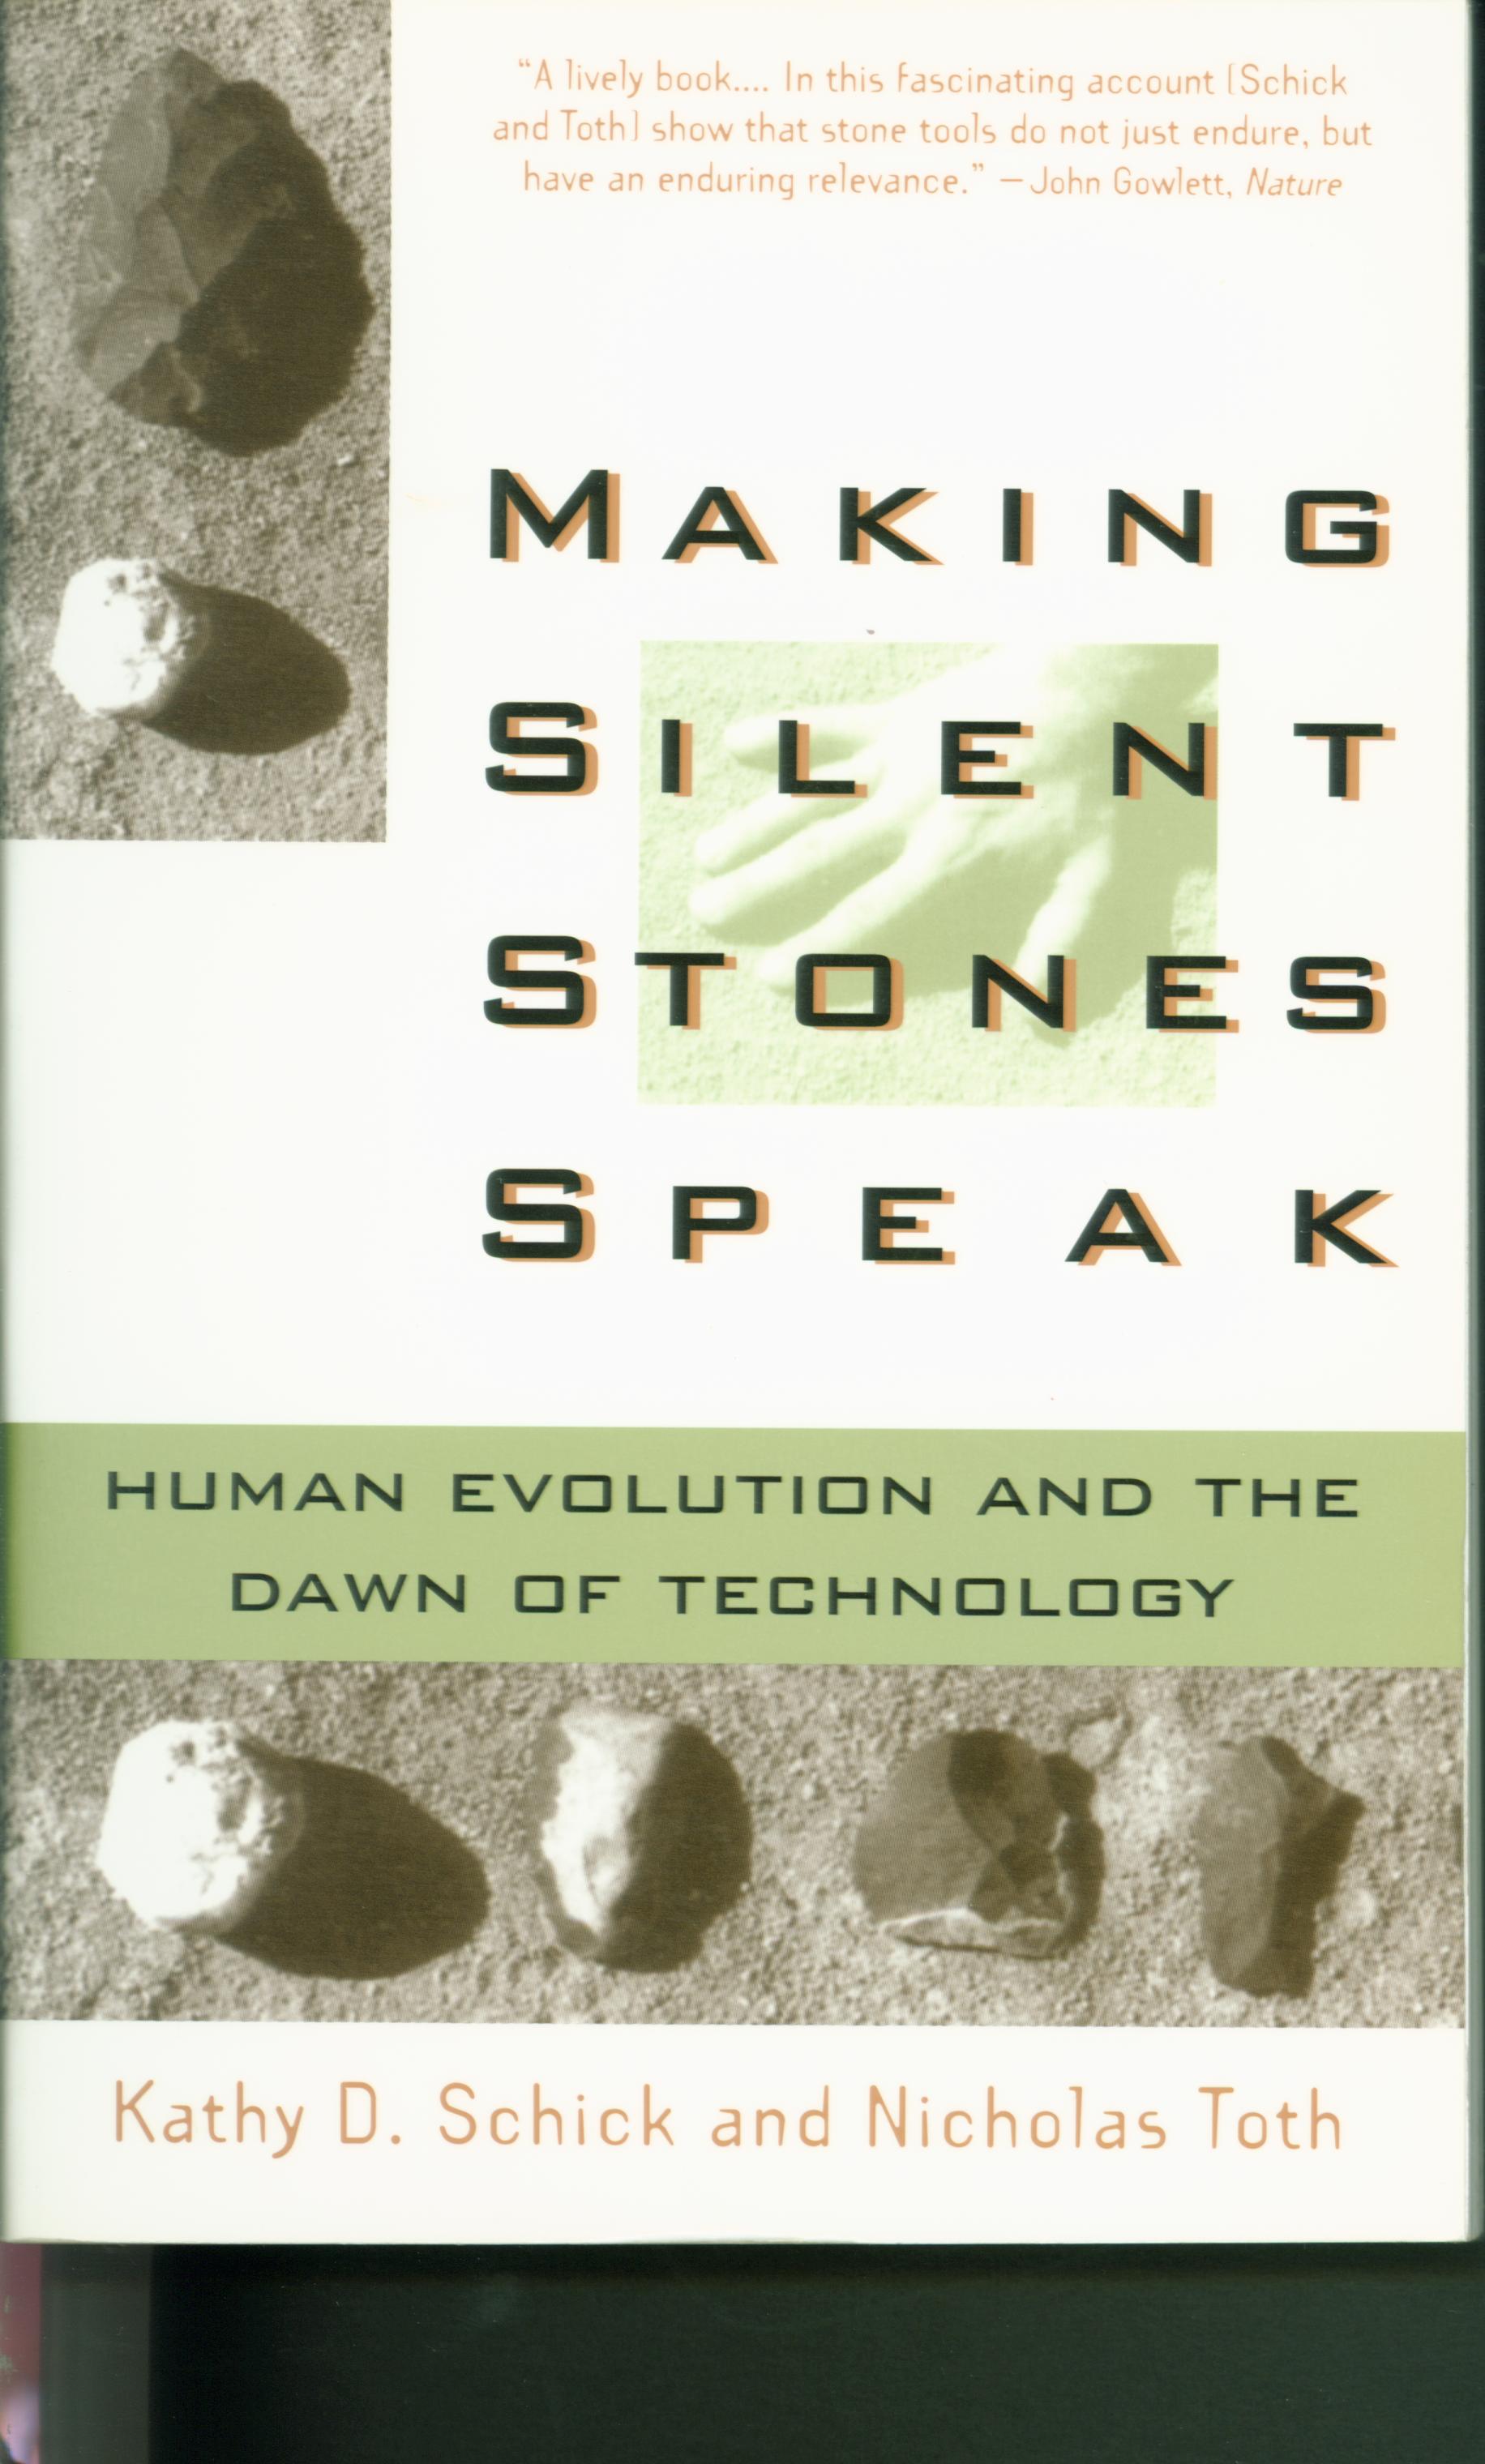 MAKING SILENT STONES SPEAK: human evolution and the dawn of technology--paper.